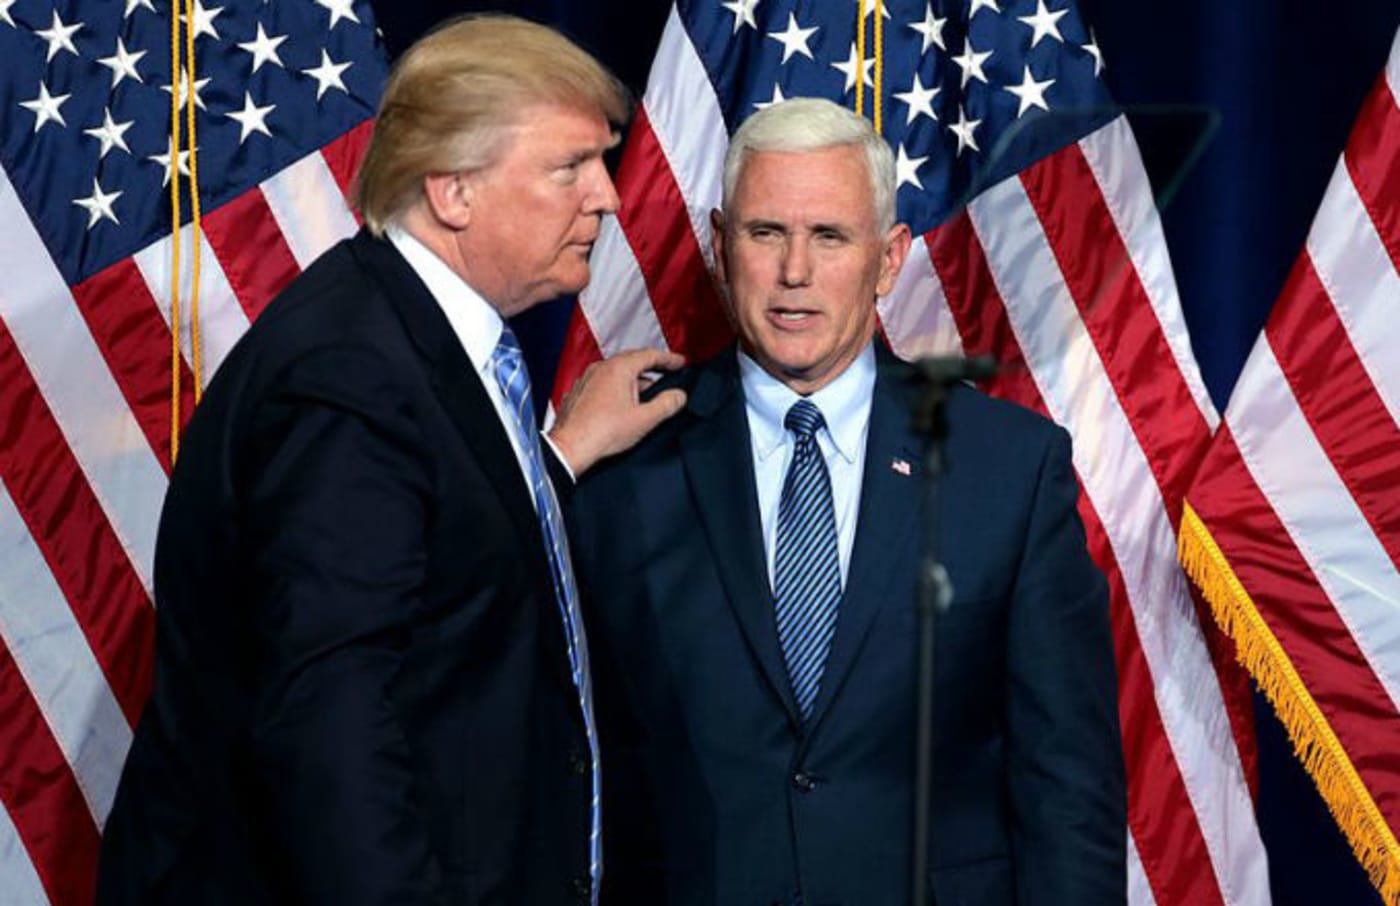 Sorry Trump, Mike Pence “Accepts” Obama Was Born in the U.S. | Complex